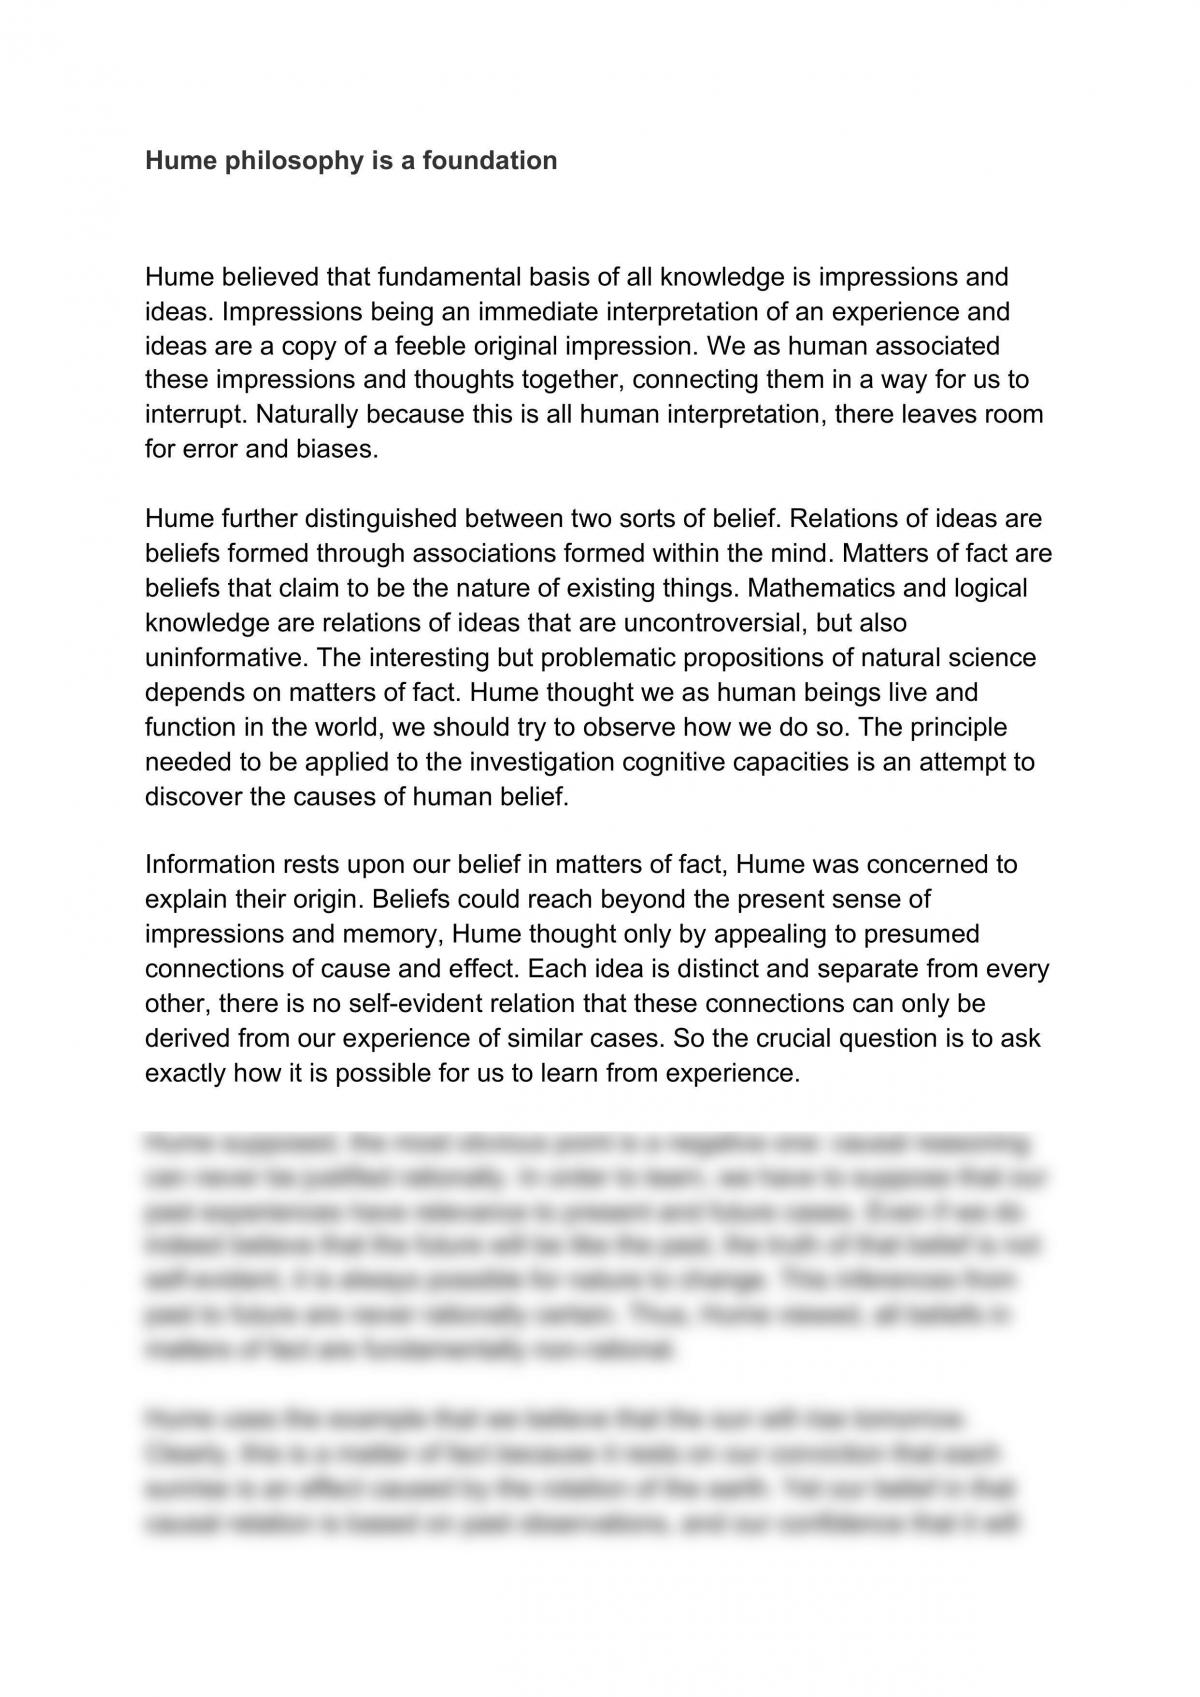 Hume philosophy is a foundation - Page 1